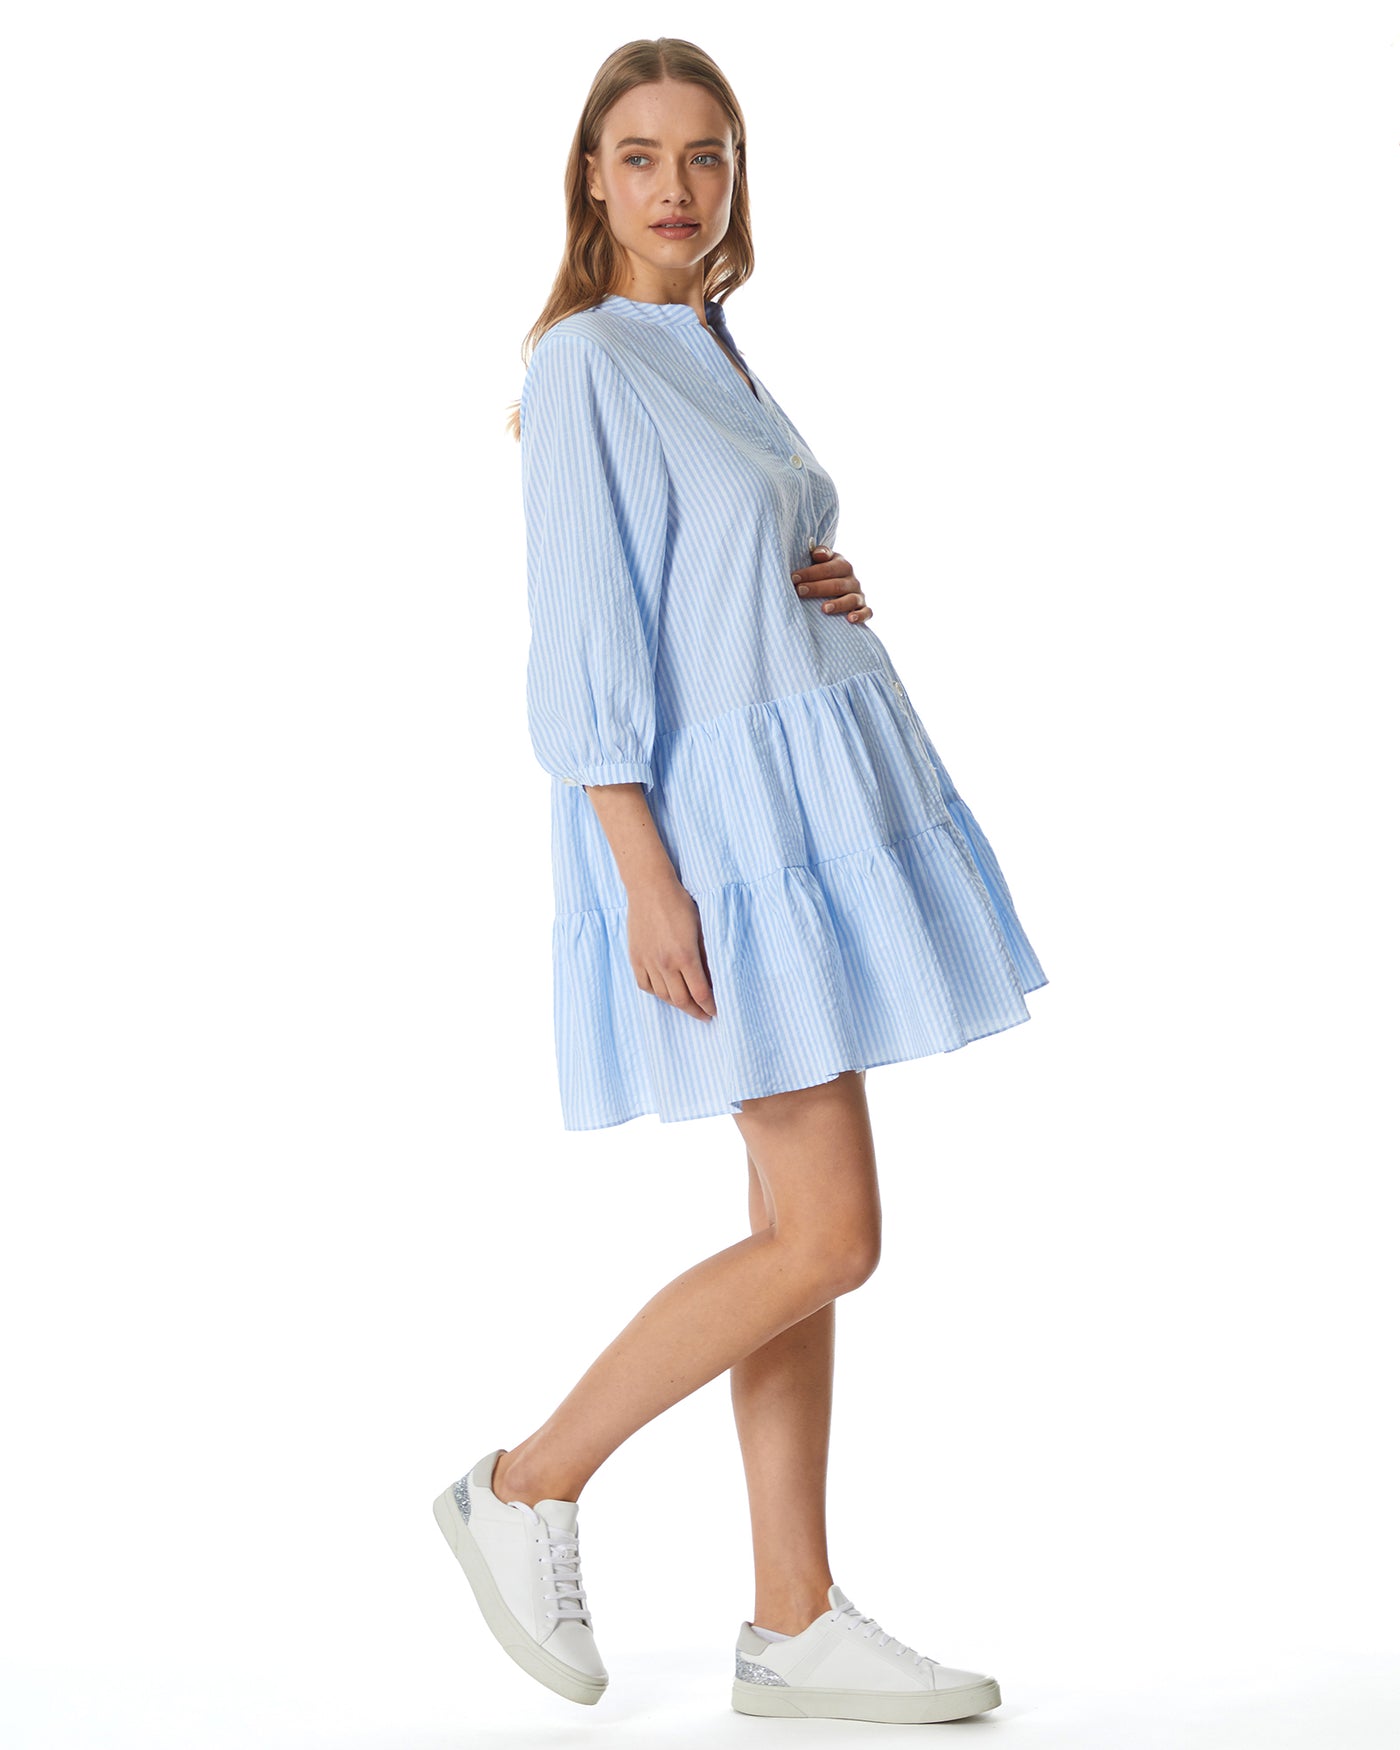 Soon Maternity | Buy Designer Maternity Clothes Online